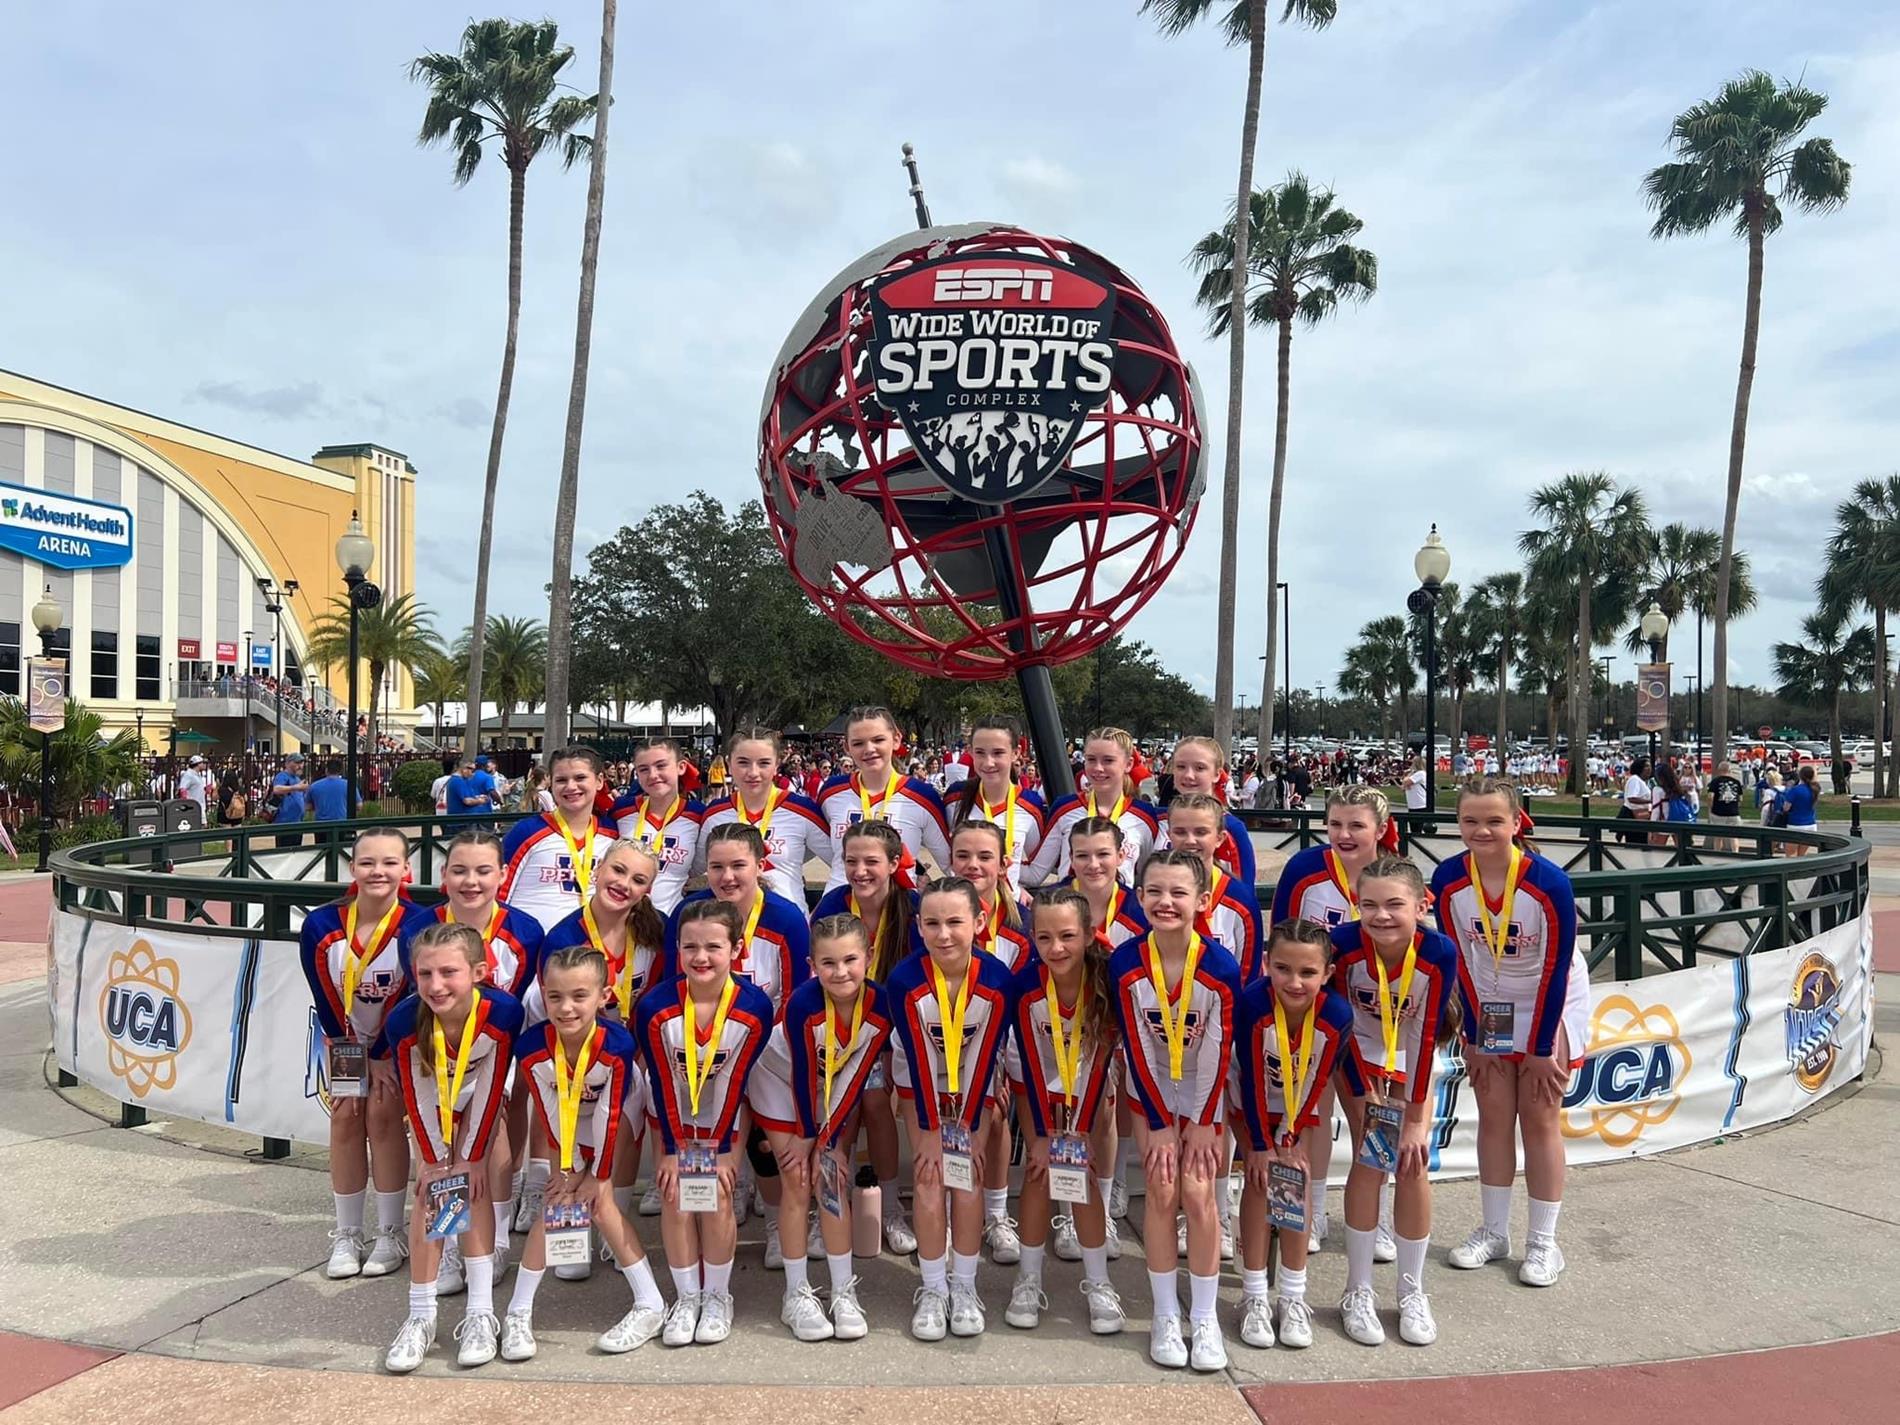 Cheerleaders at competition, espn wide world of sports logo in background